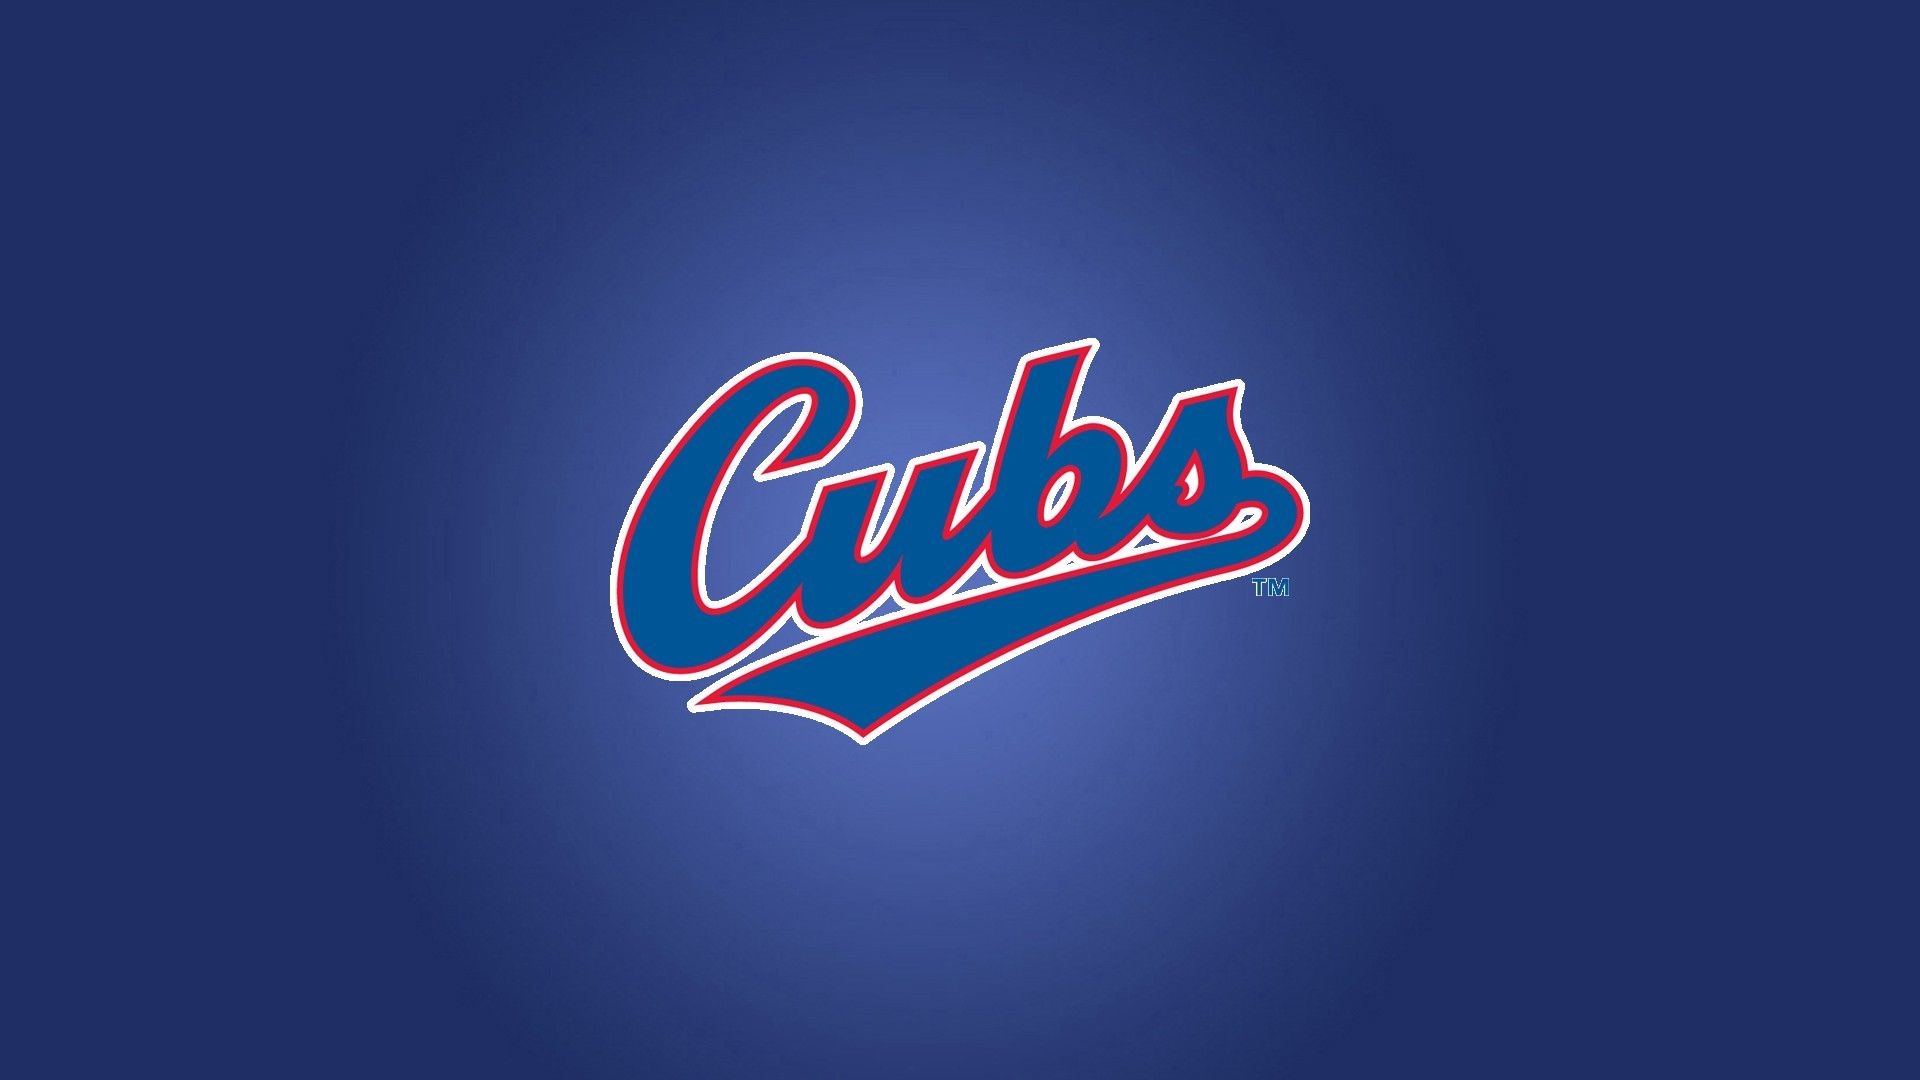 Chicago Cubs Wallpapers Tag 